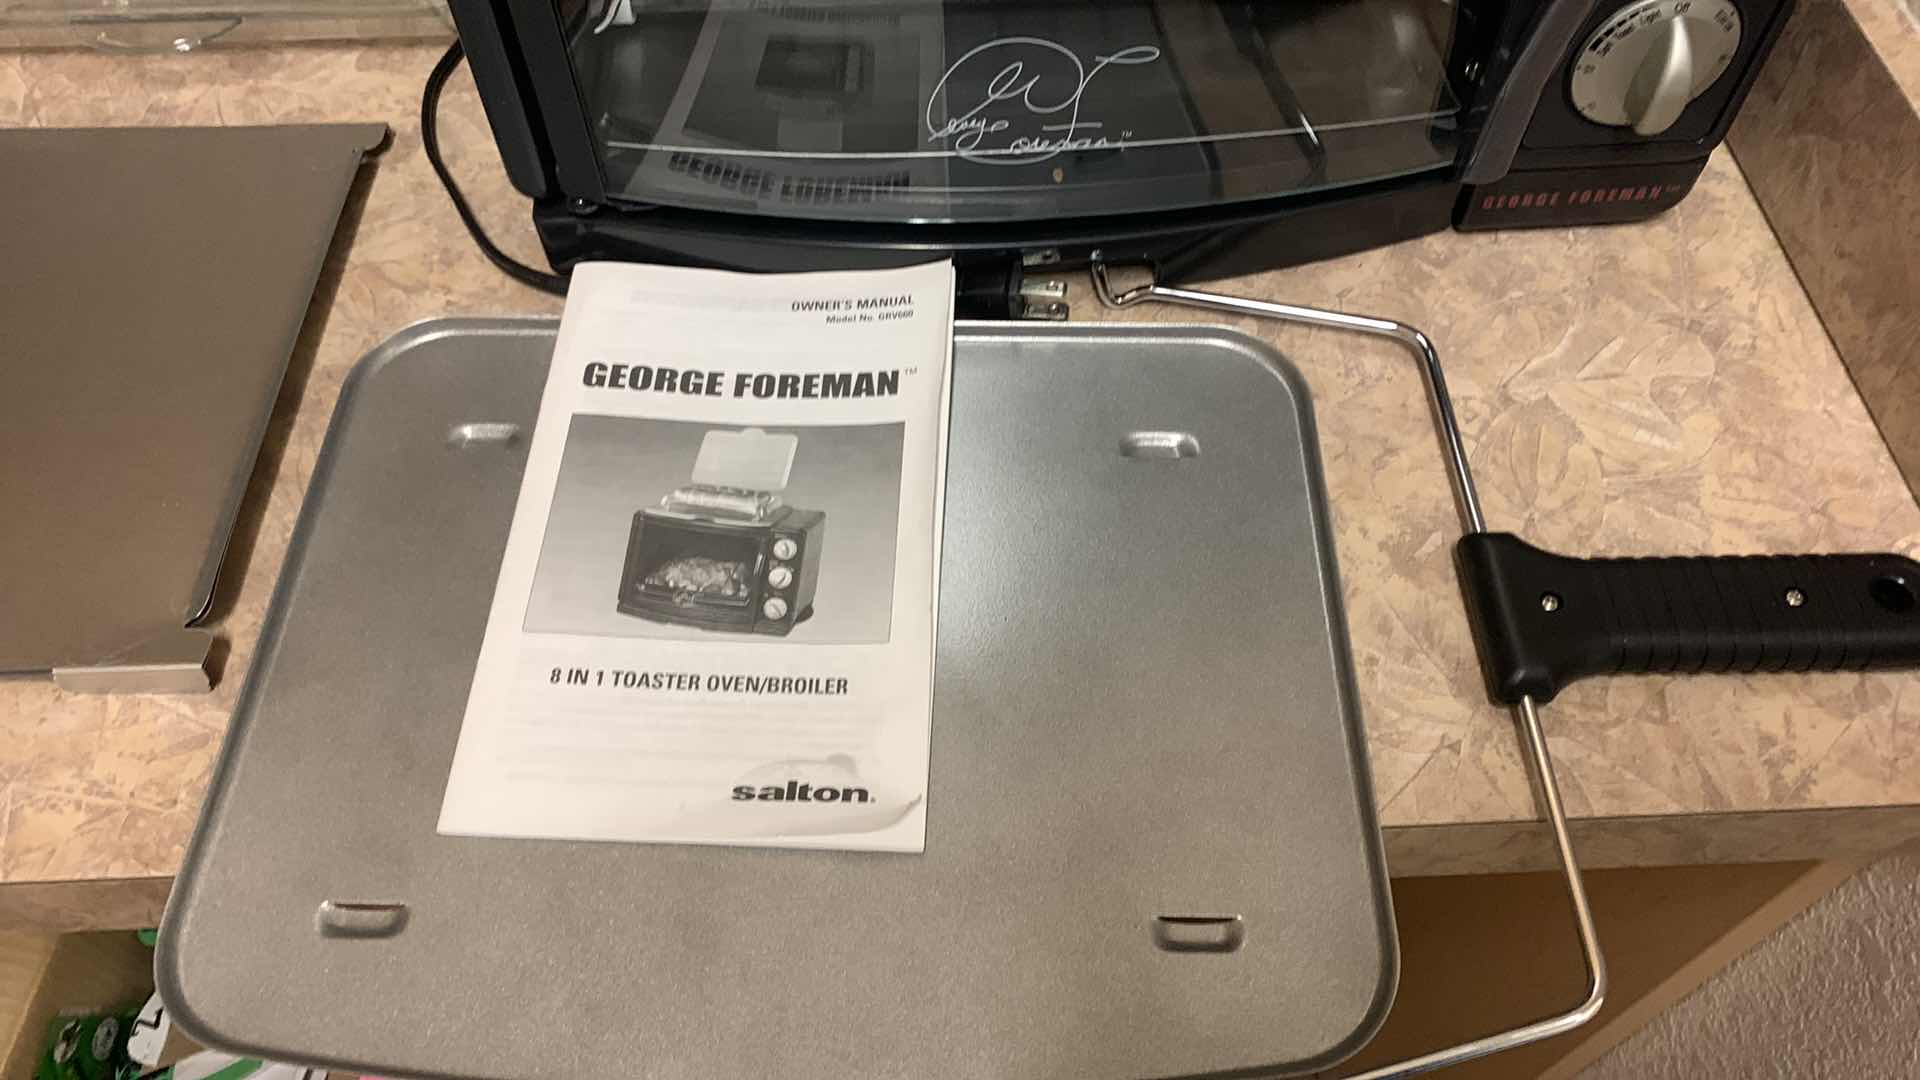 Photo 3 of GEORGE FOREMAN 8 in 1 OVEN/BROILER